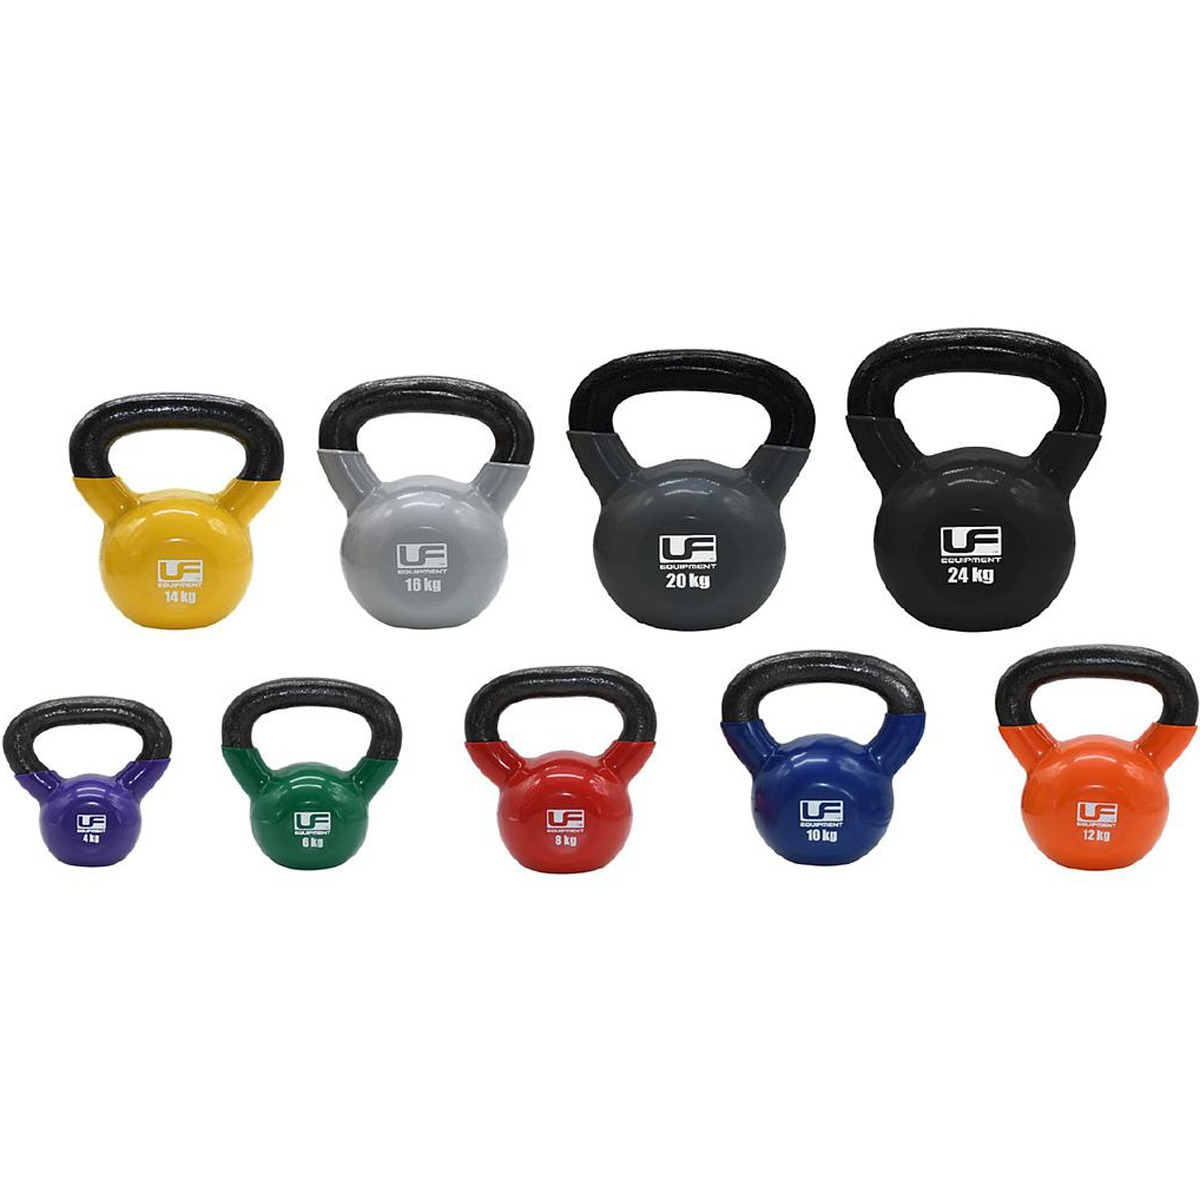  Bionic Body Soft Kettlebell with Handle - 10, 15, 20, 25, 30,  35, 40 Lb. for Weightlifting, Conditioning, Strength and Core Training  (BBKB-10) : Sports & Outdoors